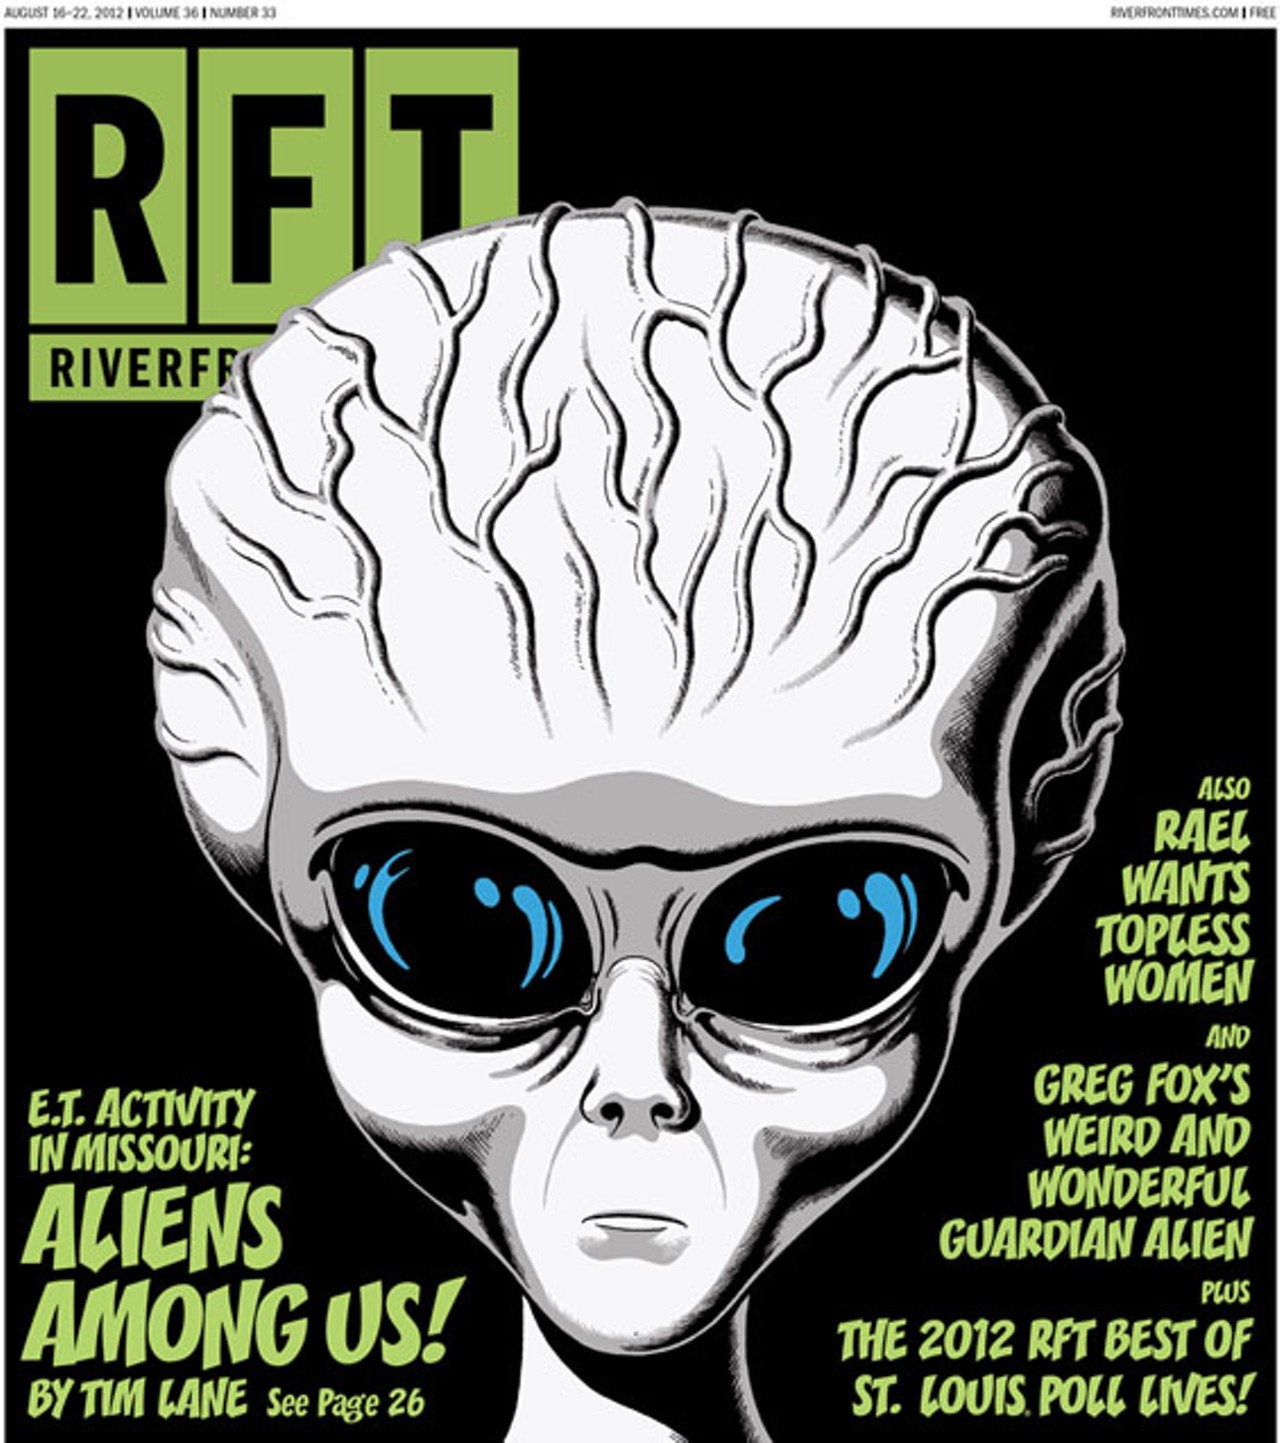 UFO and Extraterrestrial Activity in Missouri by Timothy Lane in the August 16 issue. Cover: Illustration by Tim Lane.